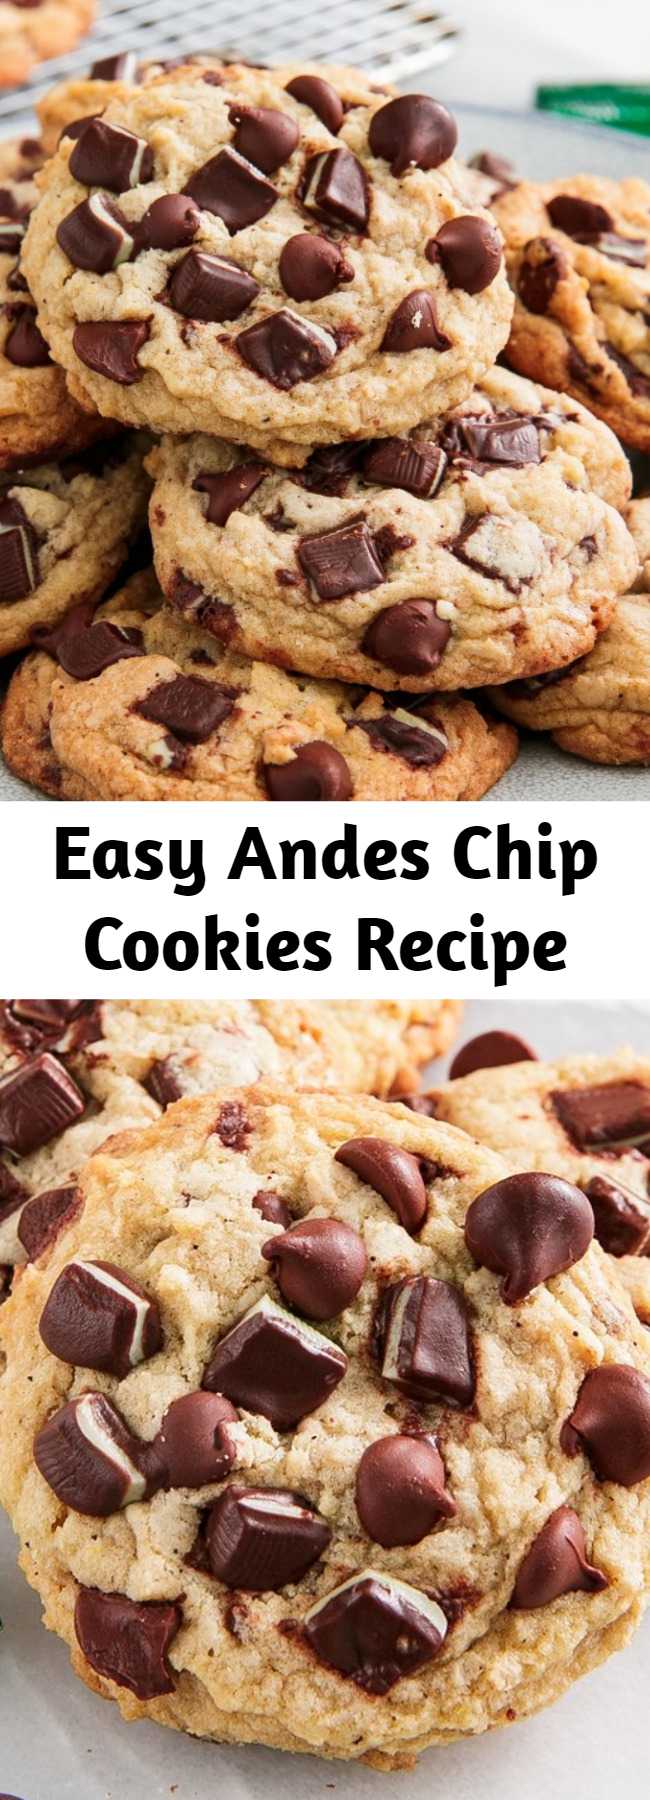 Easy Andes Chip Cookies Recipe - If you're a fan of mint + chocolate desserts, these cookies will blow your mind. The espresso powder is technically optional, but honestly, it's what makes them so special. #easy #recipe #chocolate #mint #andes #cookies #christmascookies #Baking #desserts #peppermint #holidays